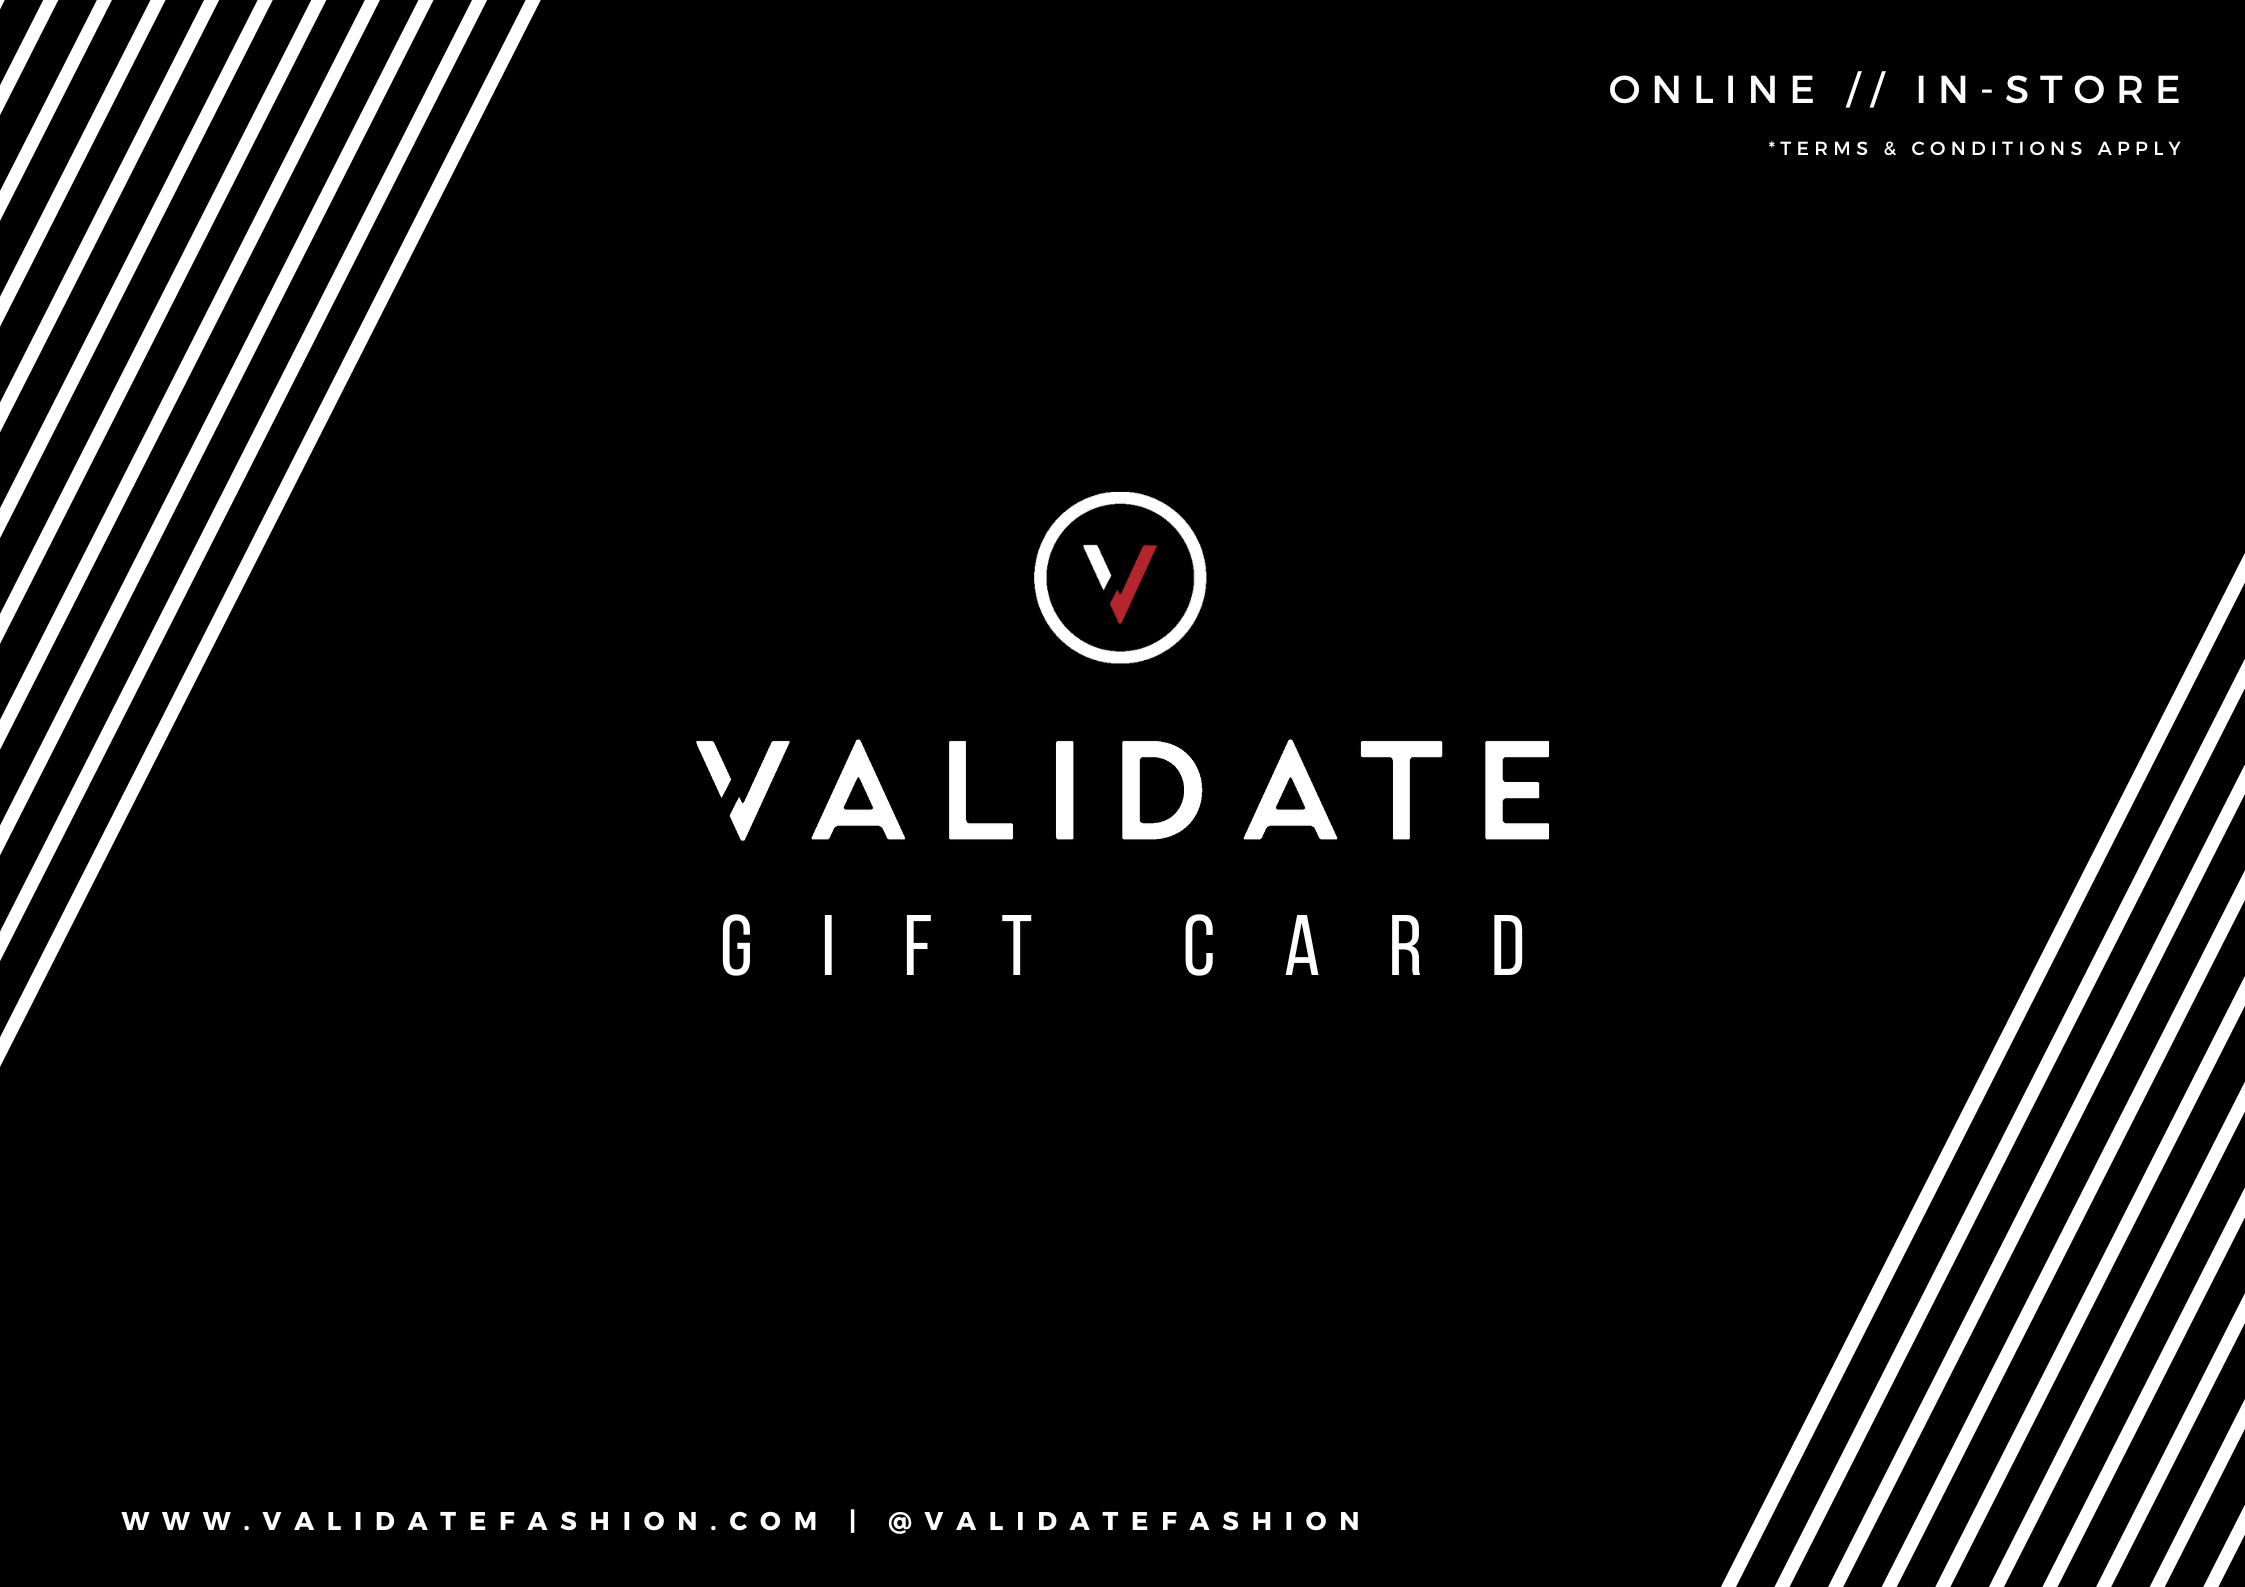 Validate Gift Card